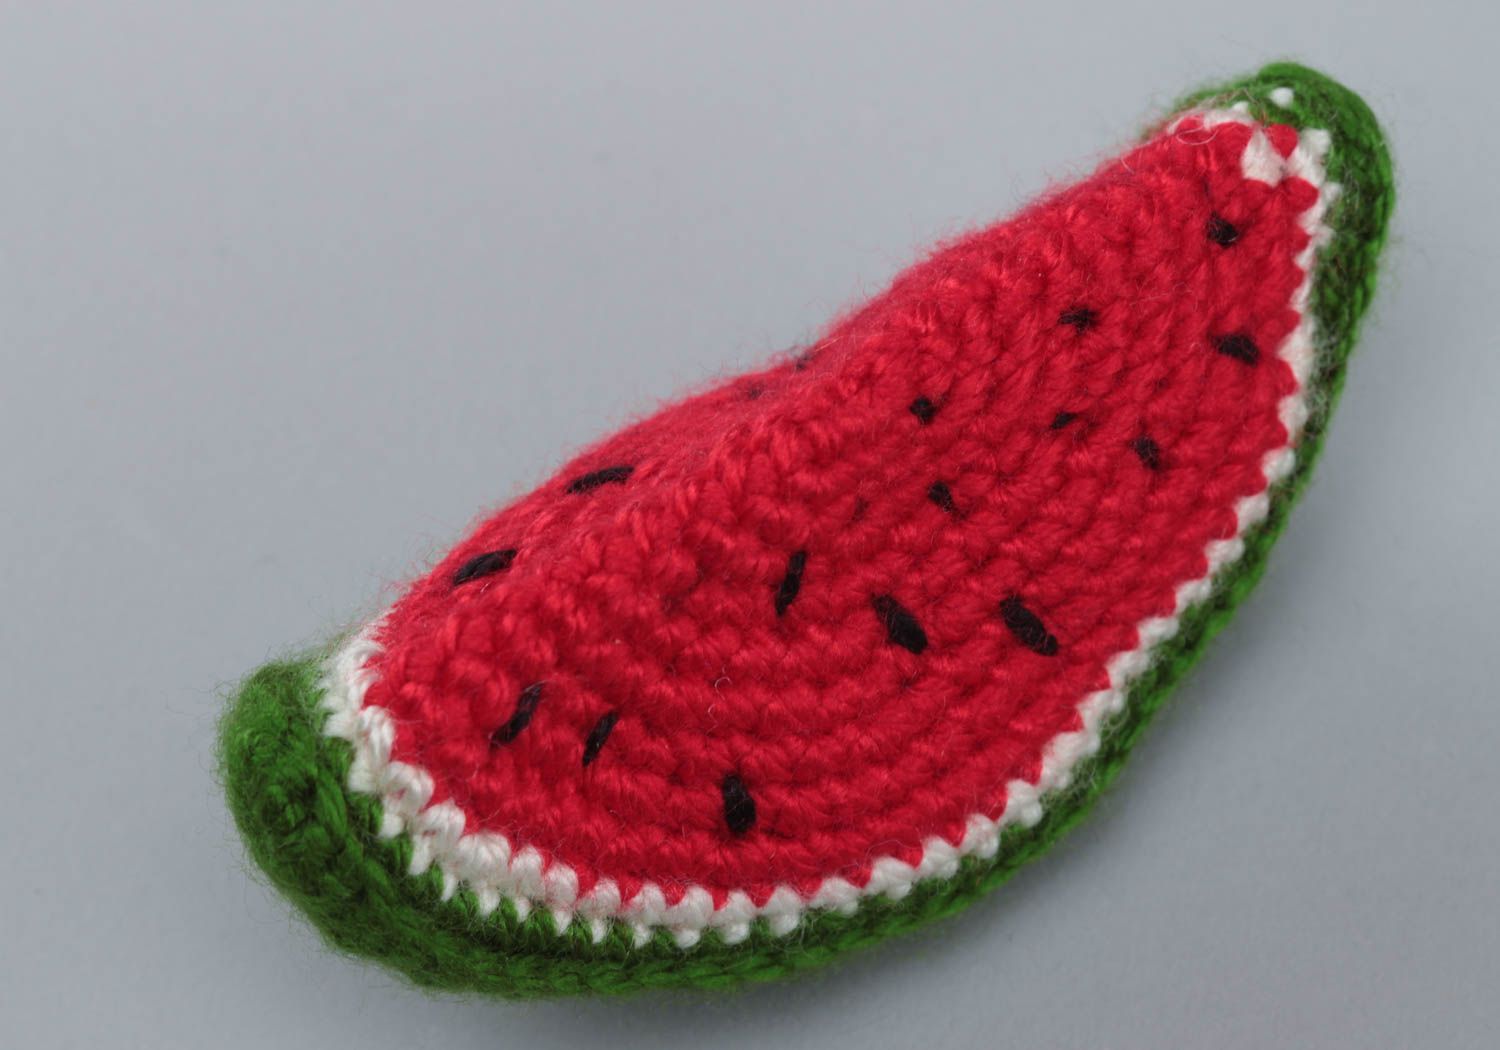 Handmade small crochet soft toy water melon slice for kids and interior decor photo 4